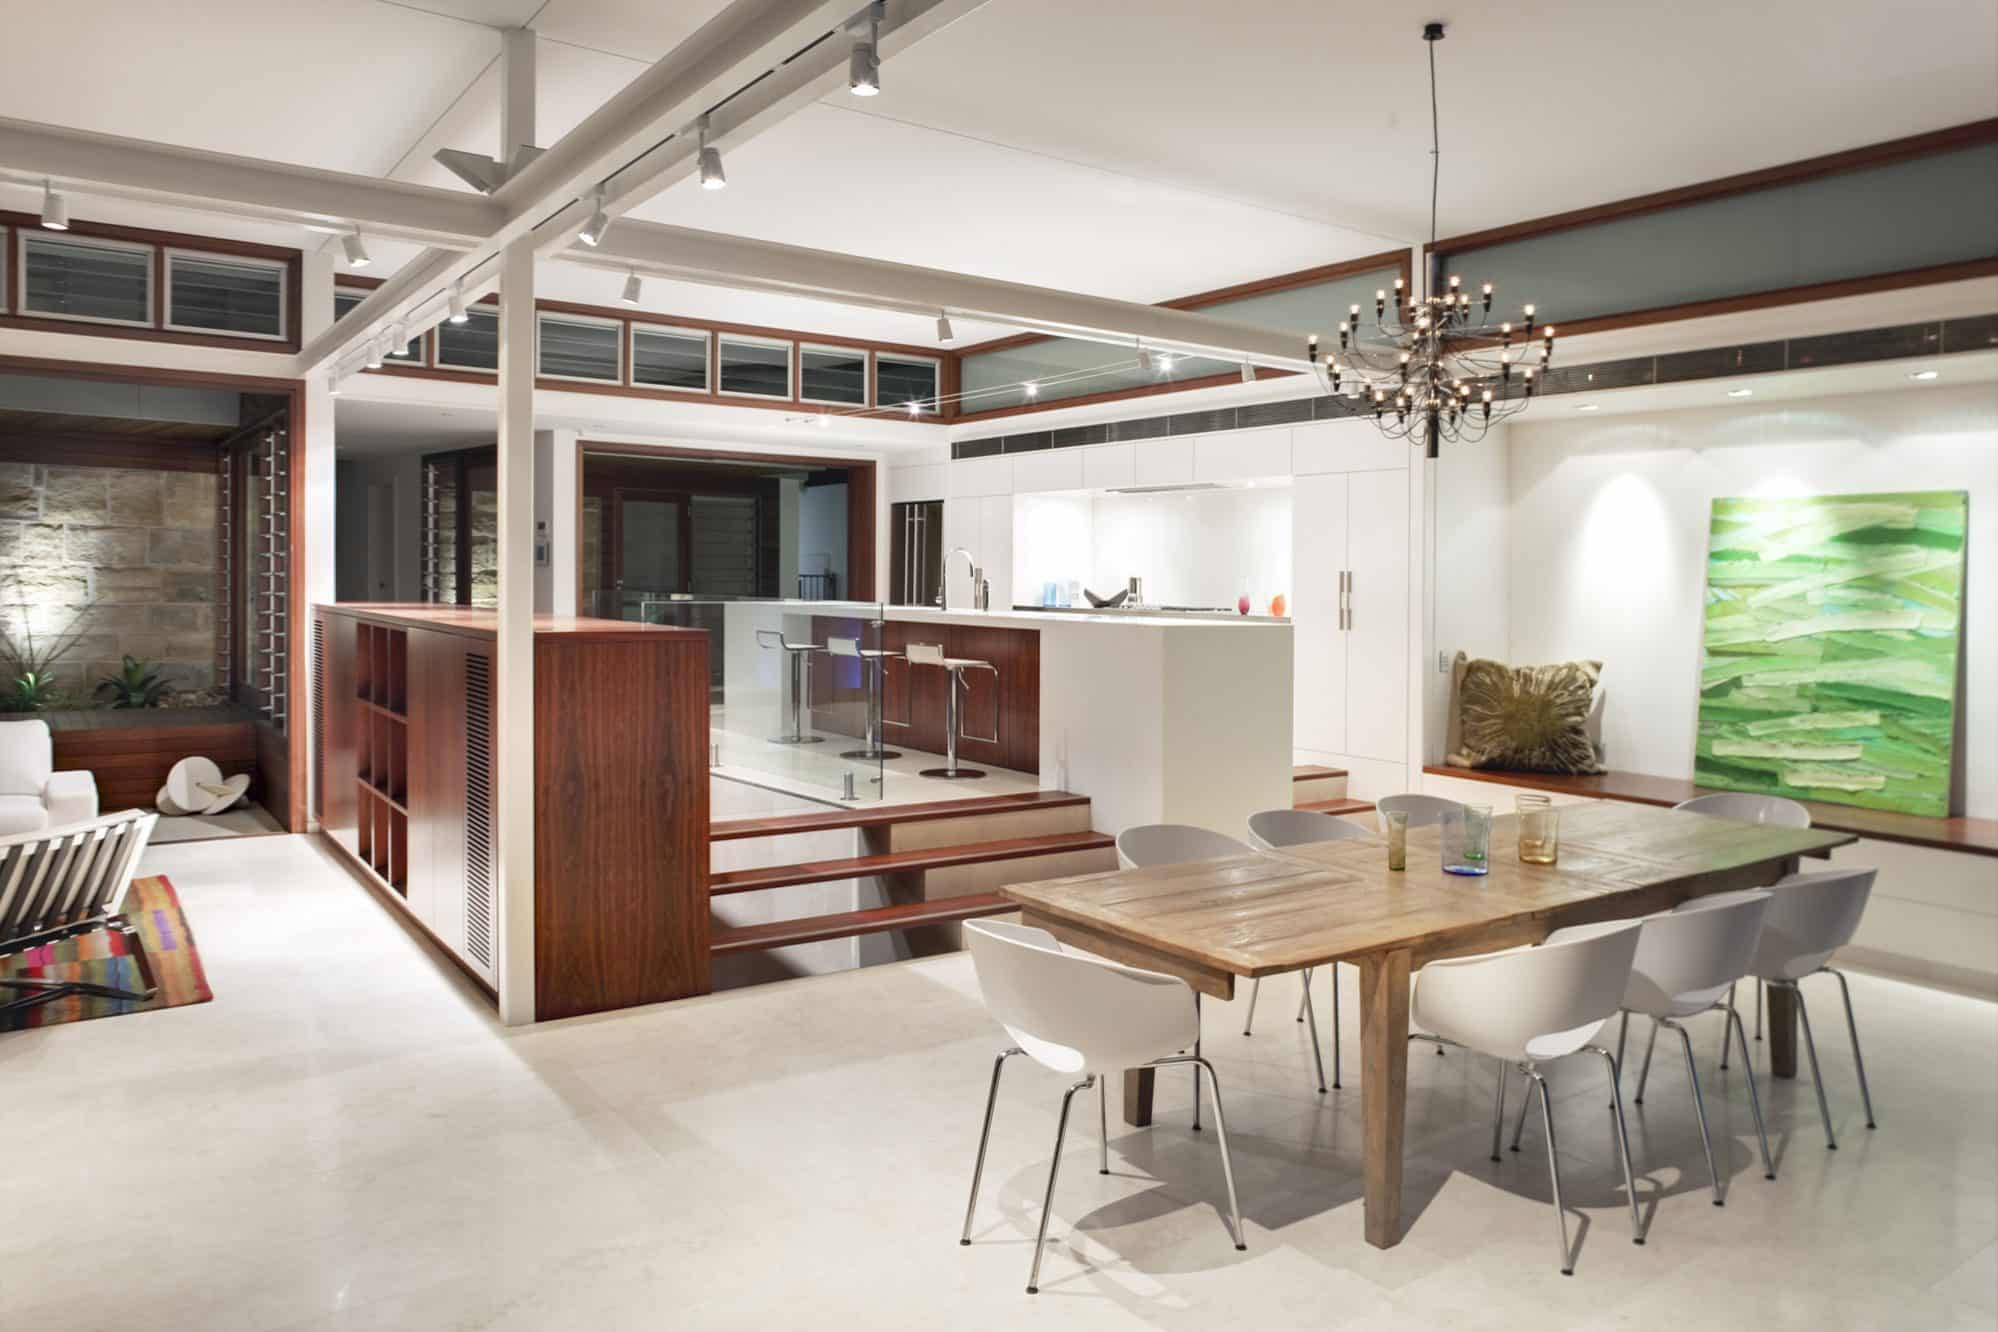 The kitchen sits within the corner of a large open plan room